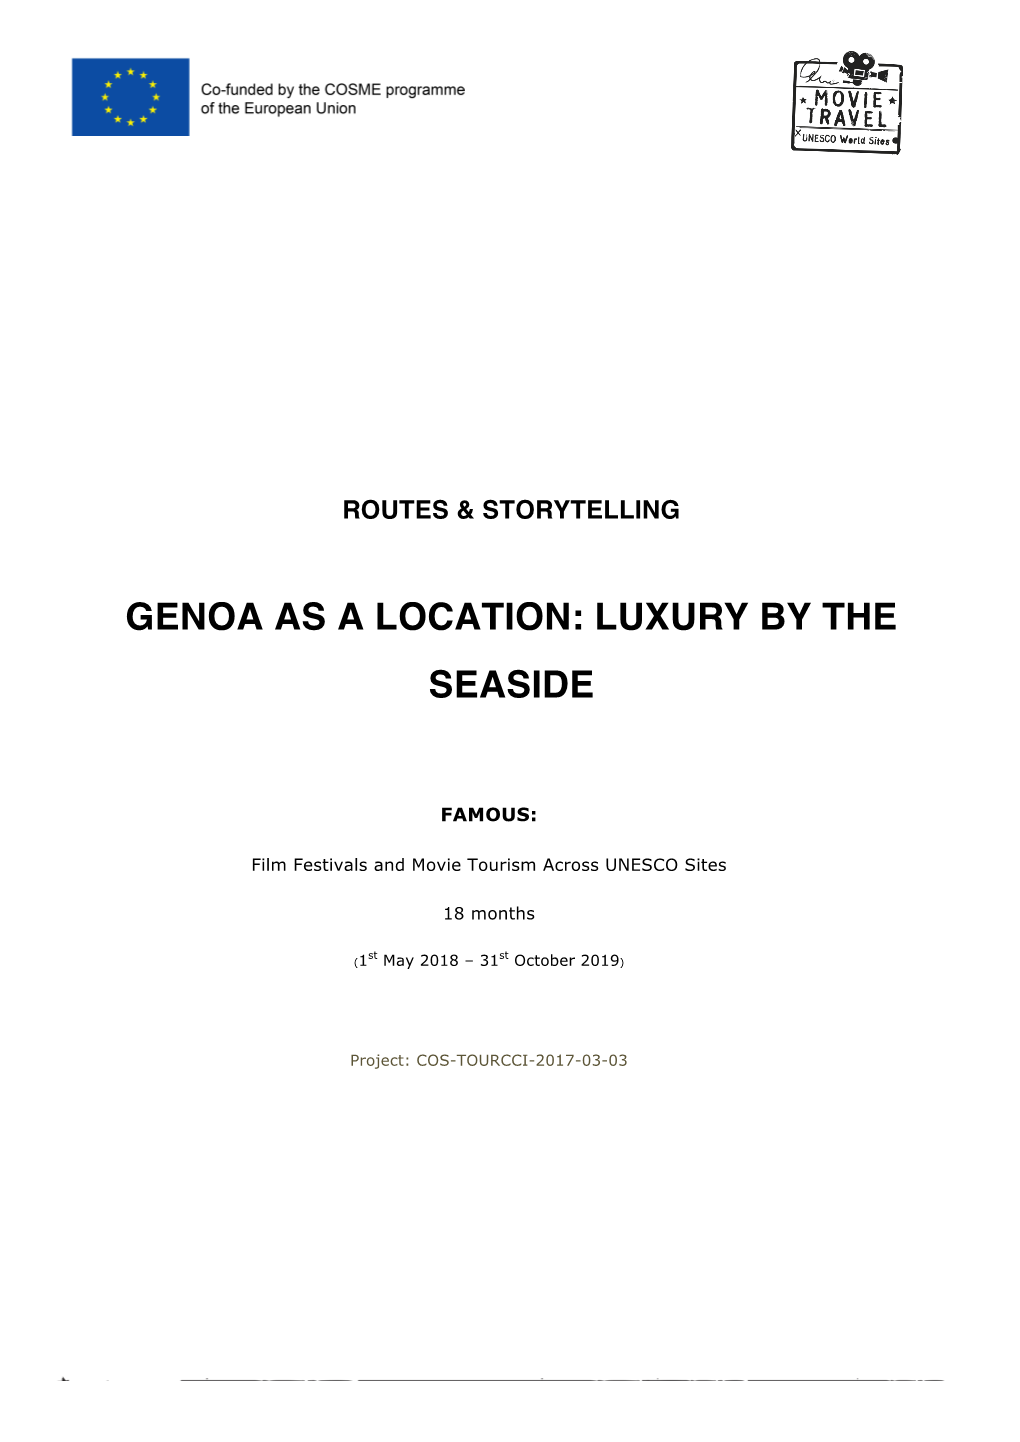 Genoa As a Location: Luxury by The